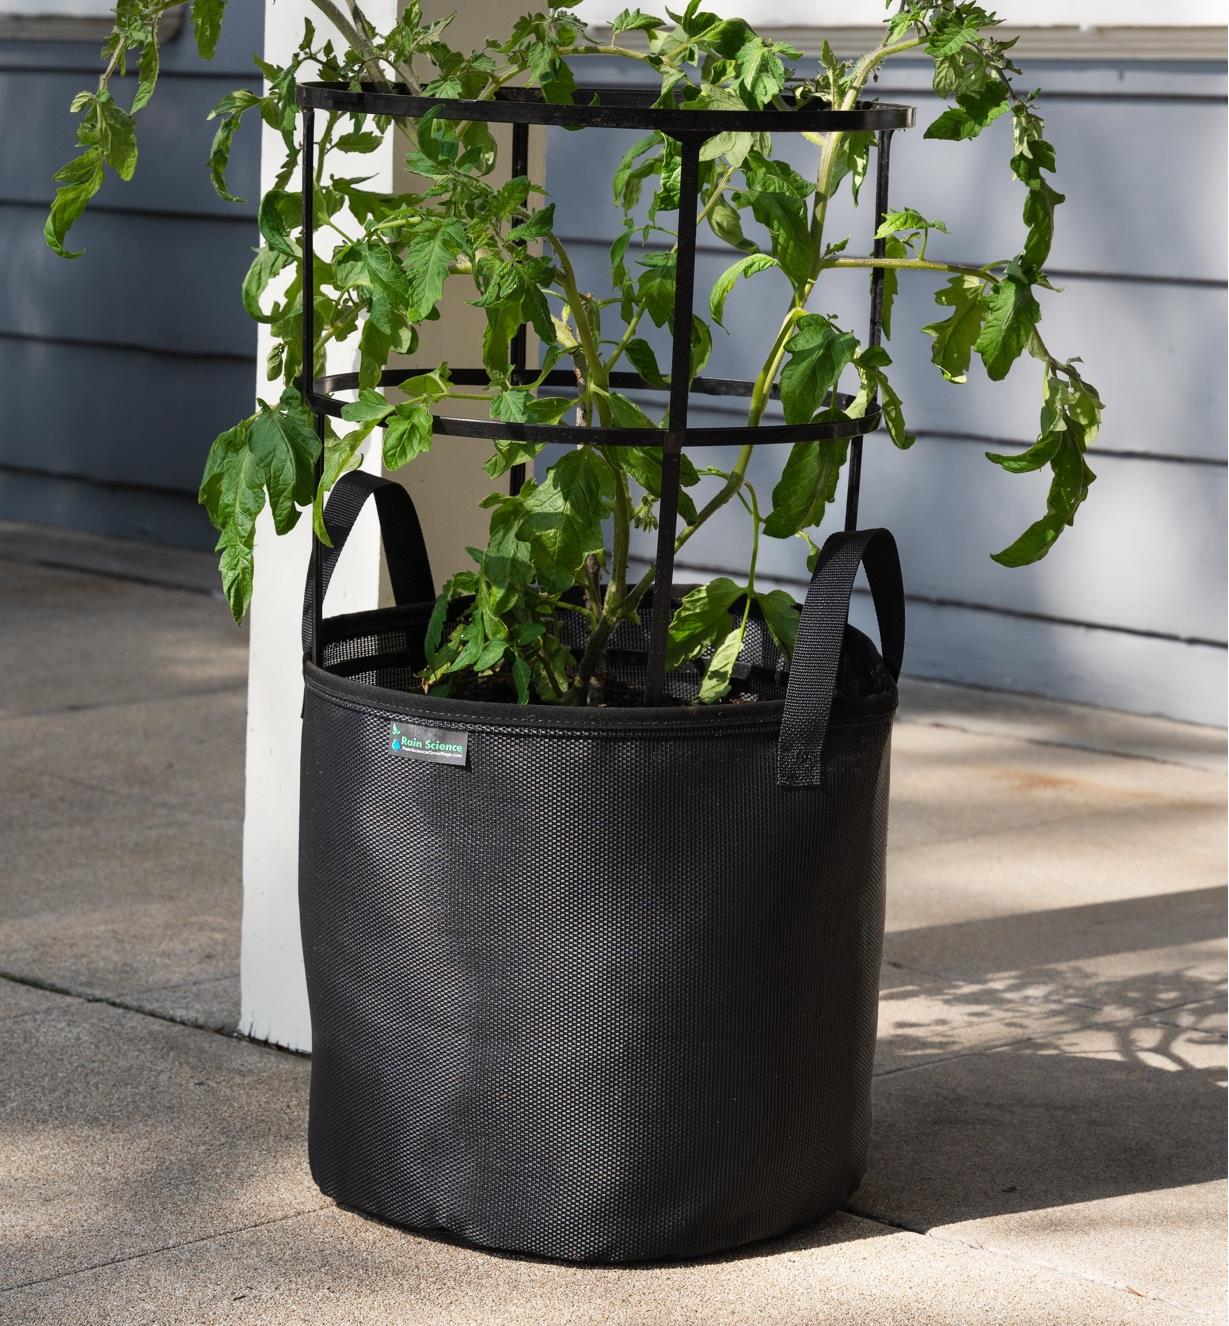 The 7 gallon mesh fabric pot with tomato plants growing in it sits on a porch